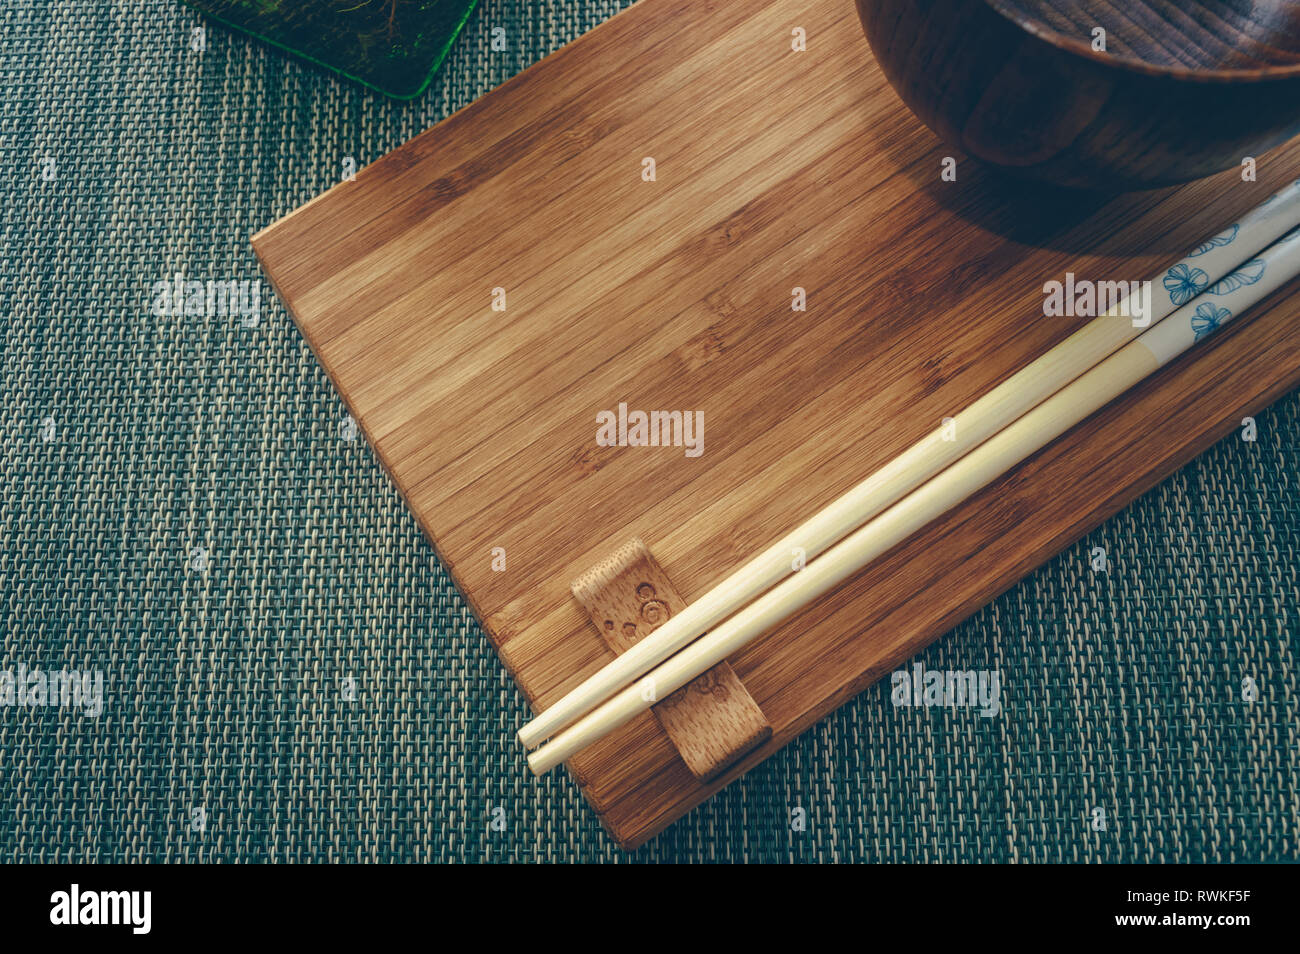 top view of bamboo board with wooden chopsticks and bowl asian style tablewear Stock Photo